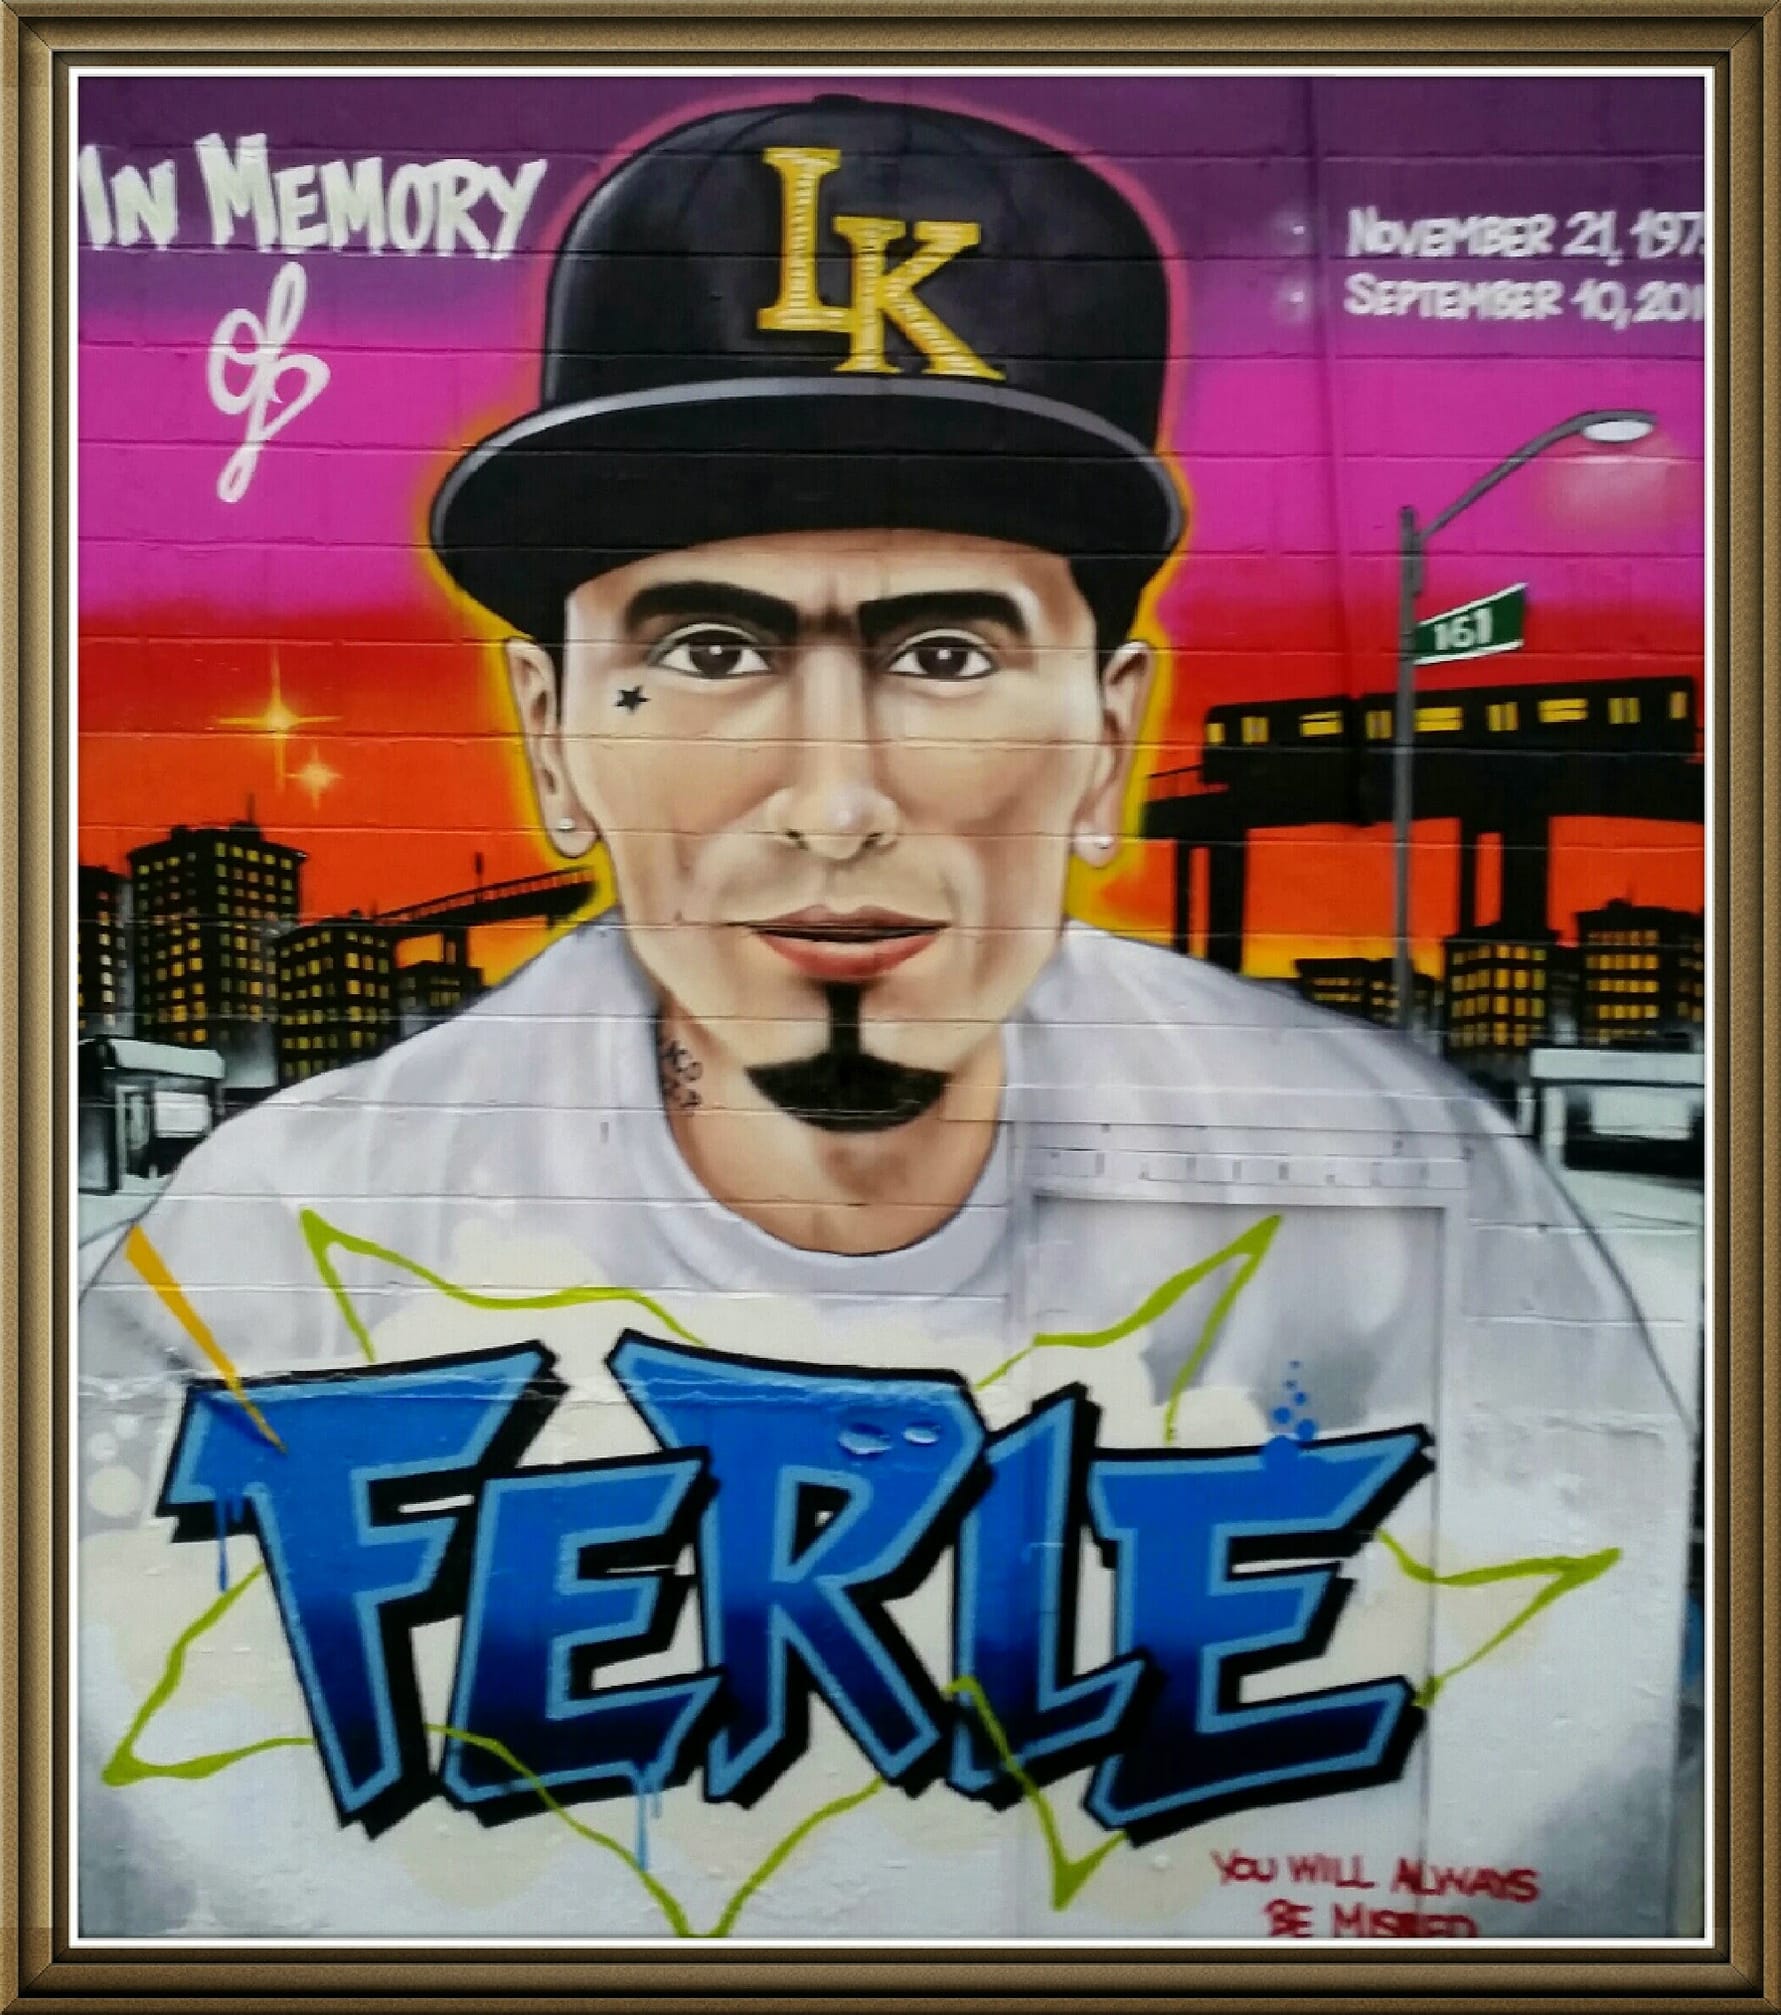 A painted mural of a person with a hat, and the word 'Ferle' written under it